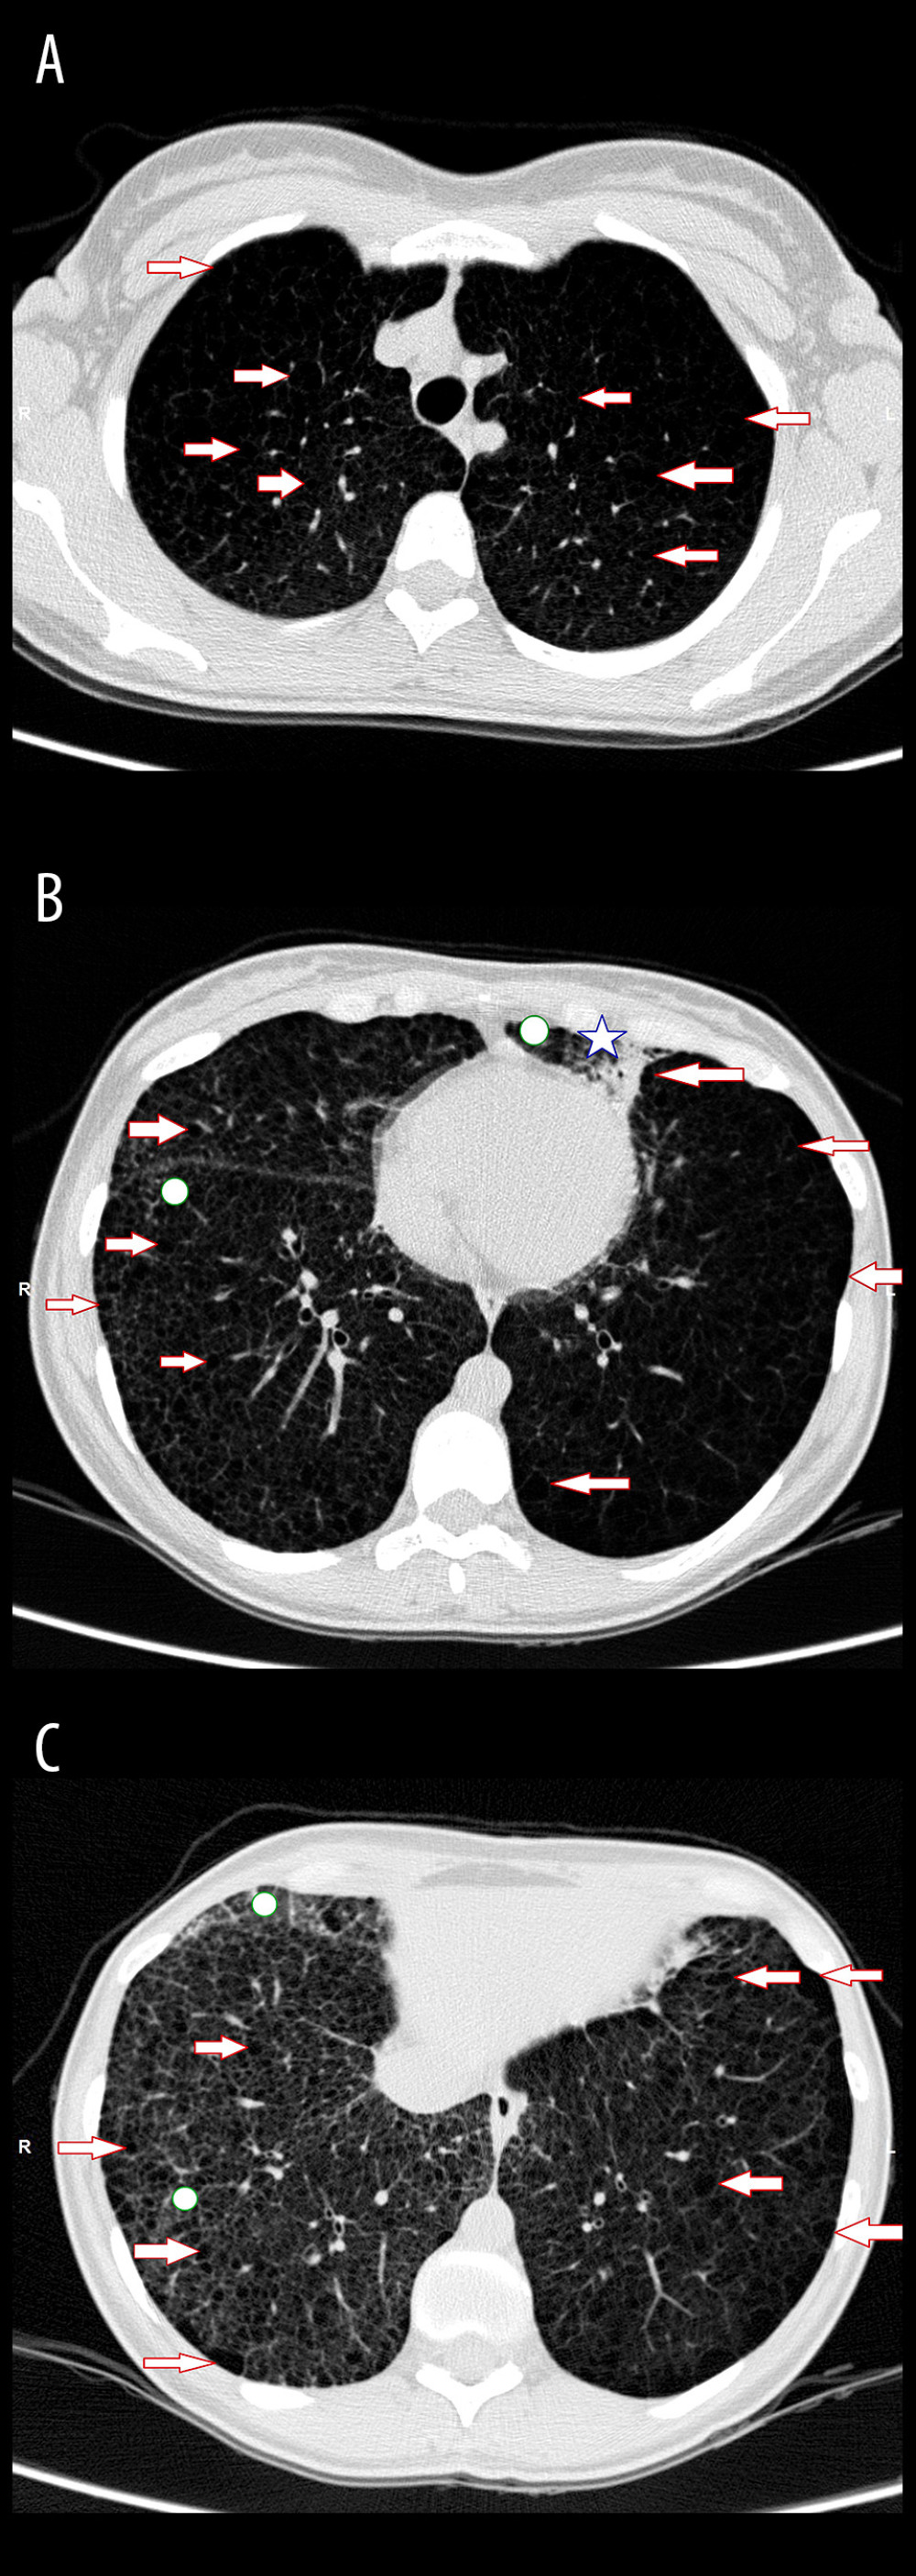 Chest computed tomography images of the patient when she had COVID-19 pneumonia 5 months after the diagnosis of pulmonary lymphangioleiomyomatosis (A) The superior lobes show diffuse, rounded, bilateral and thin-walled cysts of varying sizes (arrows). (B) The average portion of the lungs shows diffuse, rounded, bilateral cysts (arrows), foci of consolidation in lingular segment (star), and ground-glass opacities (circles). (C) The inferior lobes show diffuse, rounded, bilateral cysts (arrows) and ground-glass opacities (circles).